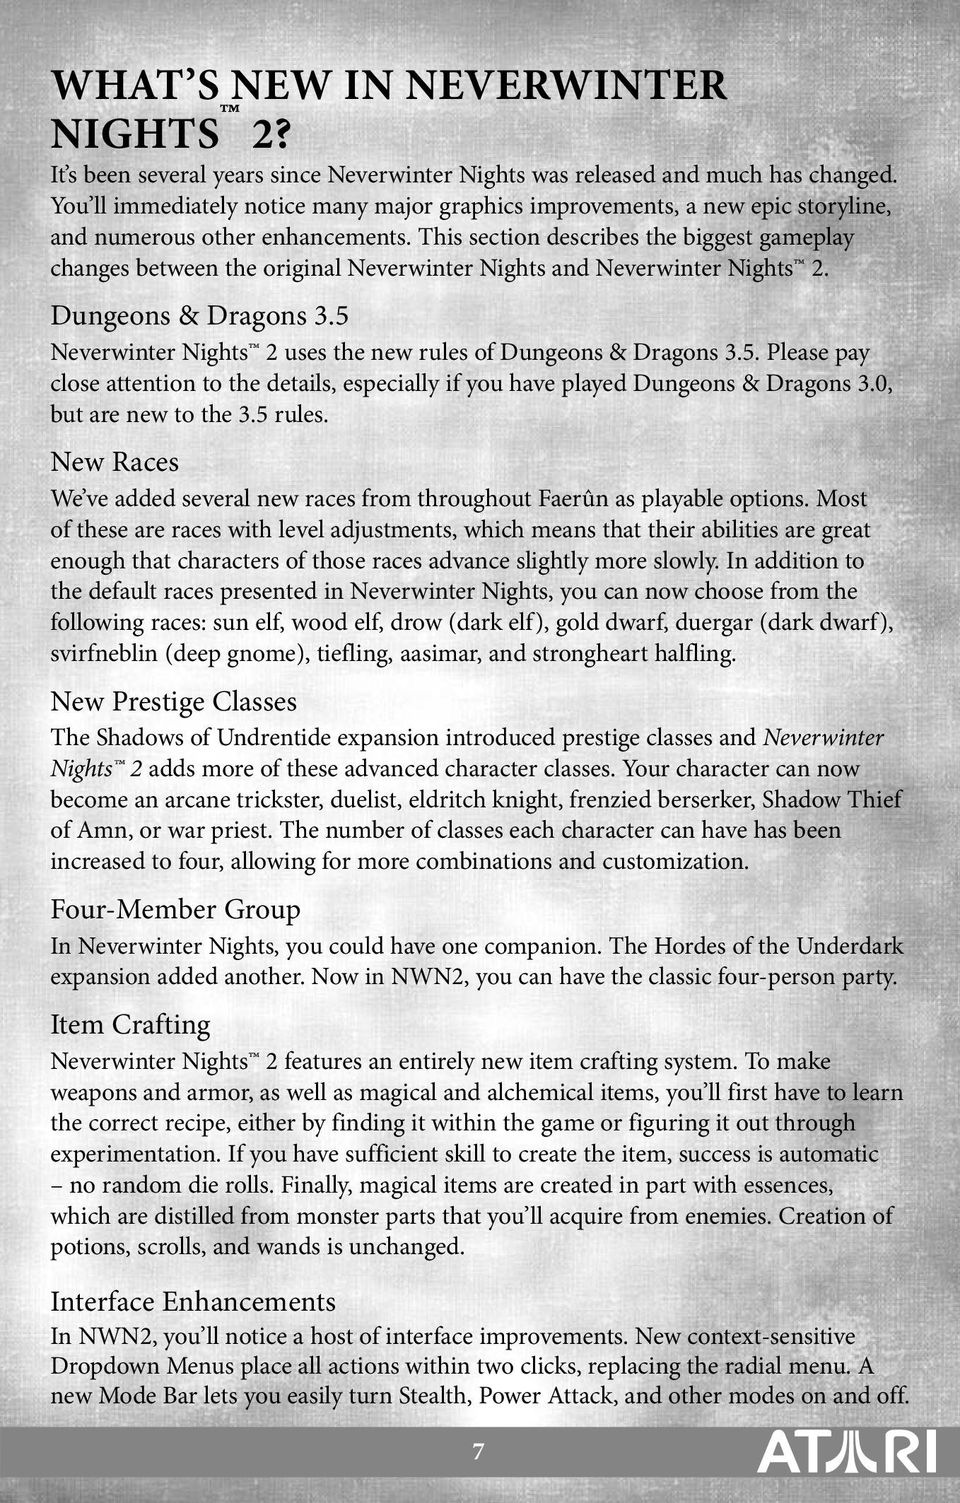 This section describes the biggest gameplay changes between the original Neverwinter Nights and Neverwinter Nights 2. Dungeons & Dragons 3.